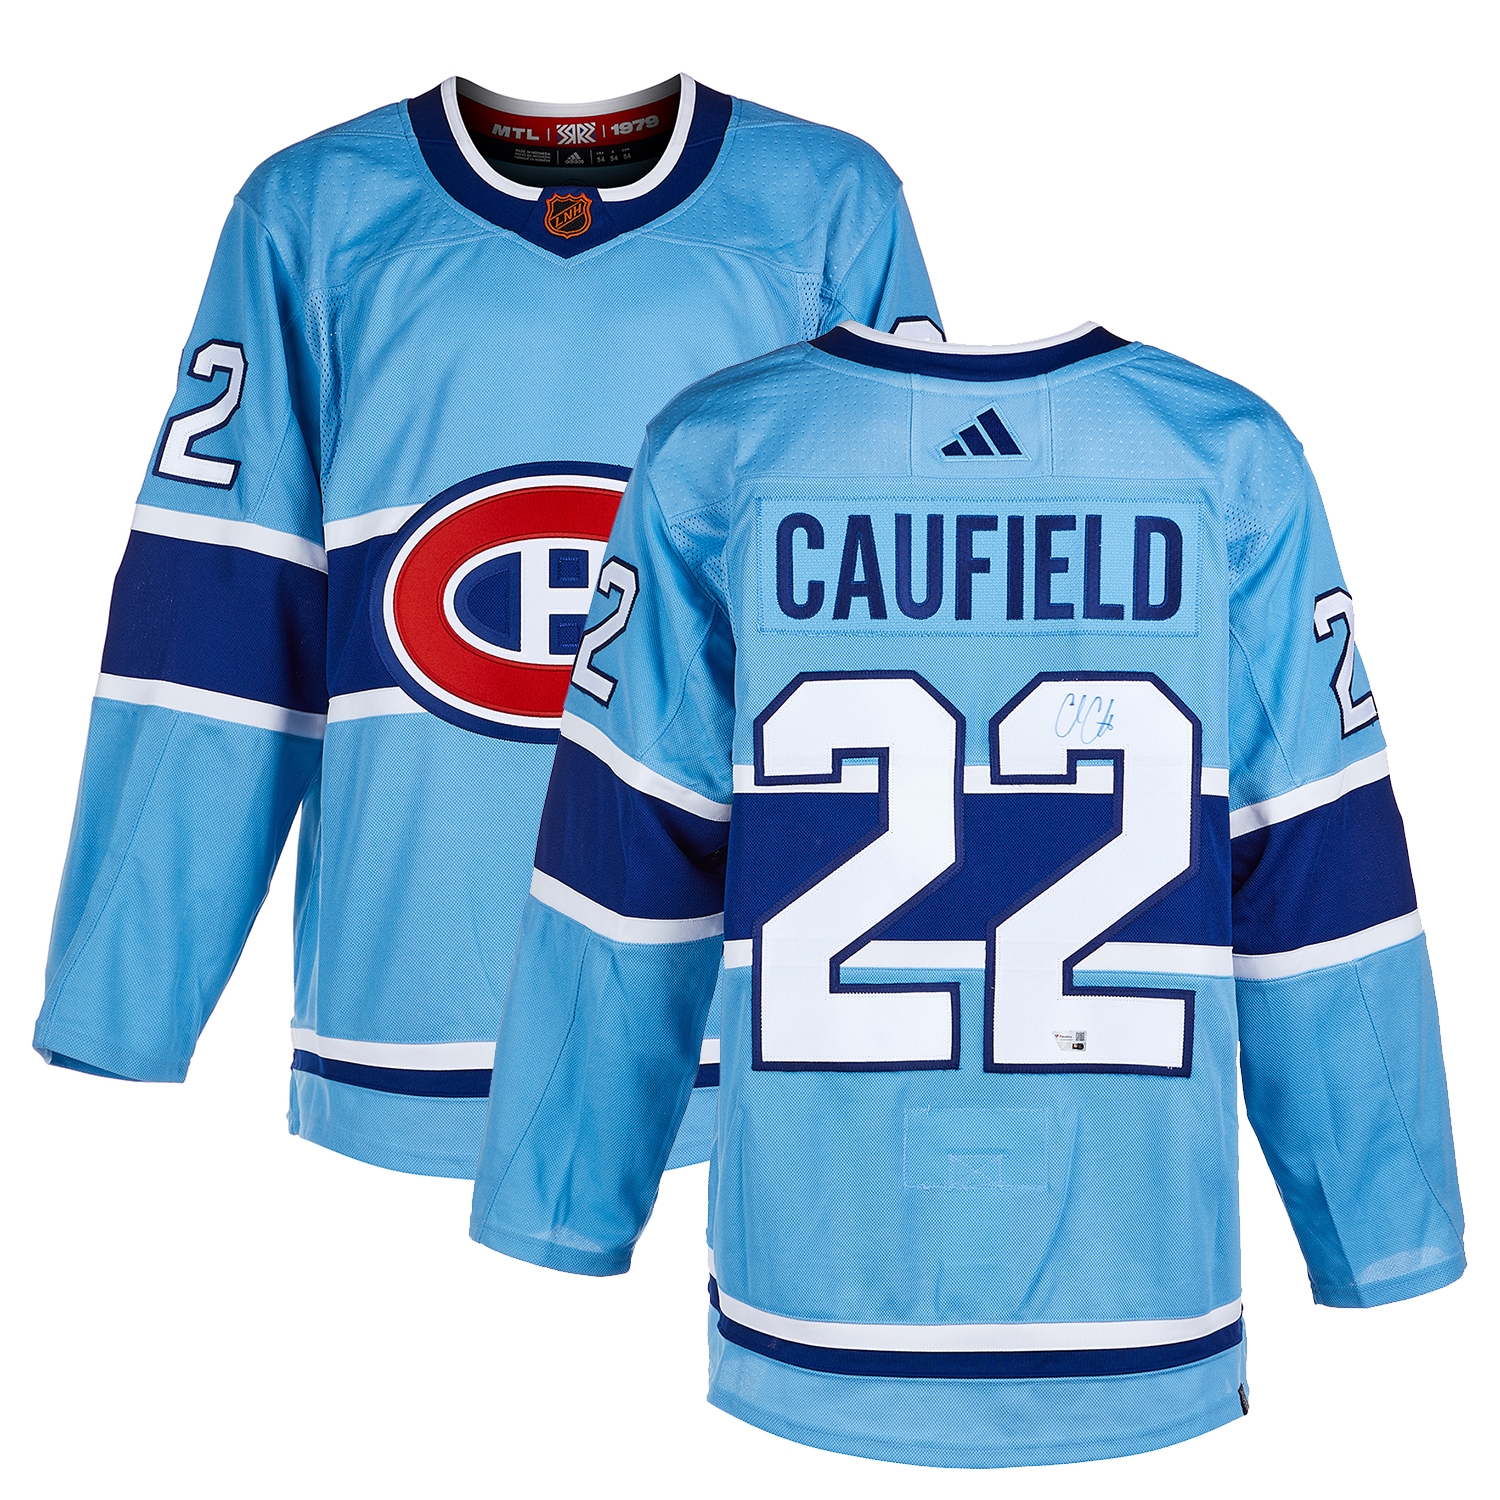 Cole Caufield Signed Montreal Canadiens Reverse Retro 2.0 adidas Jersey